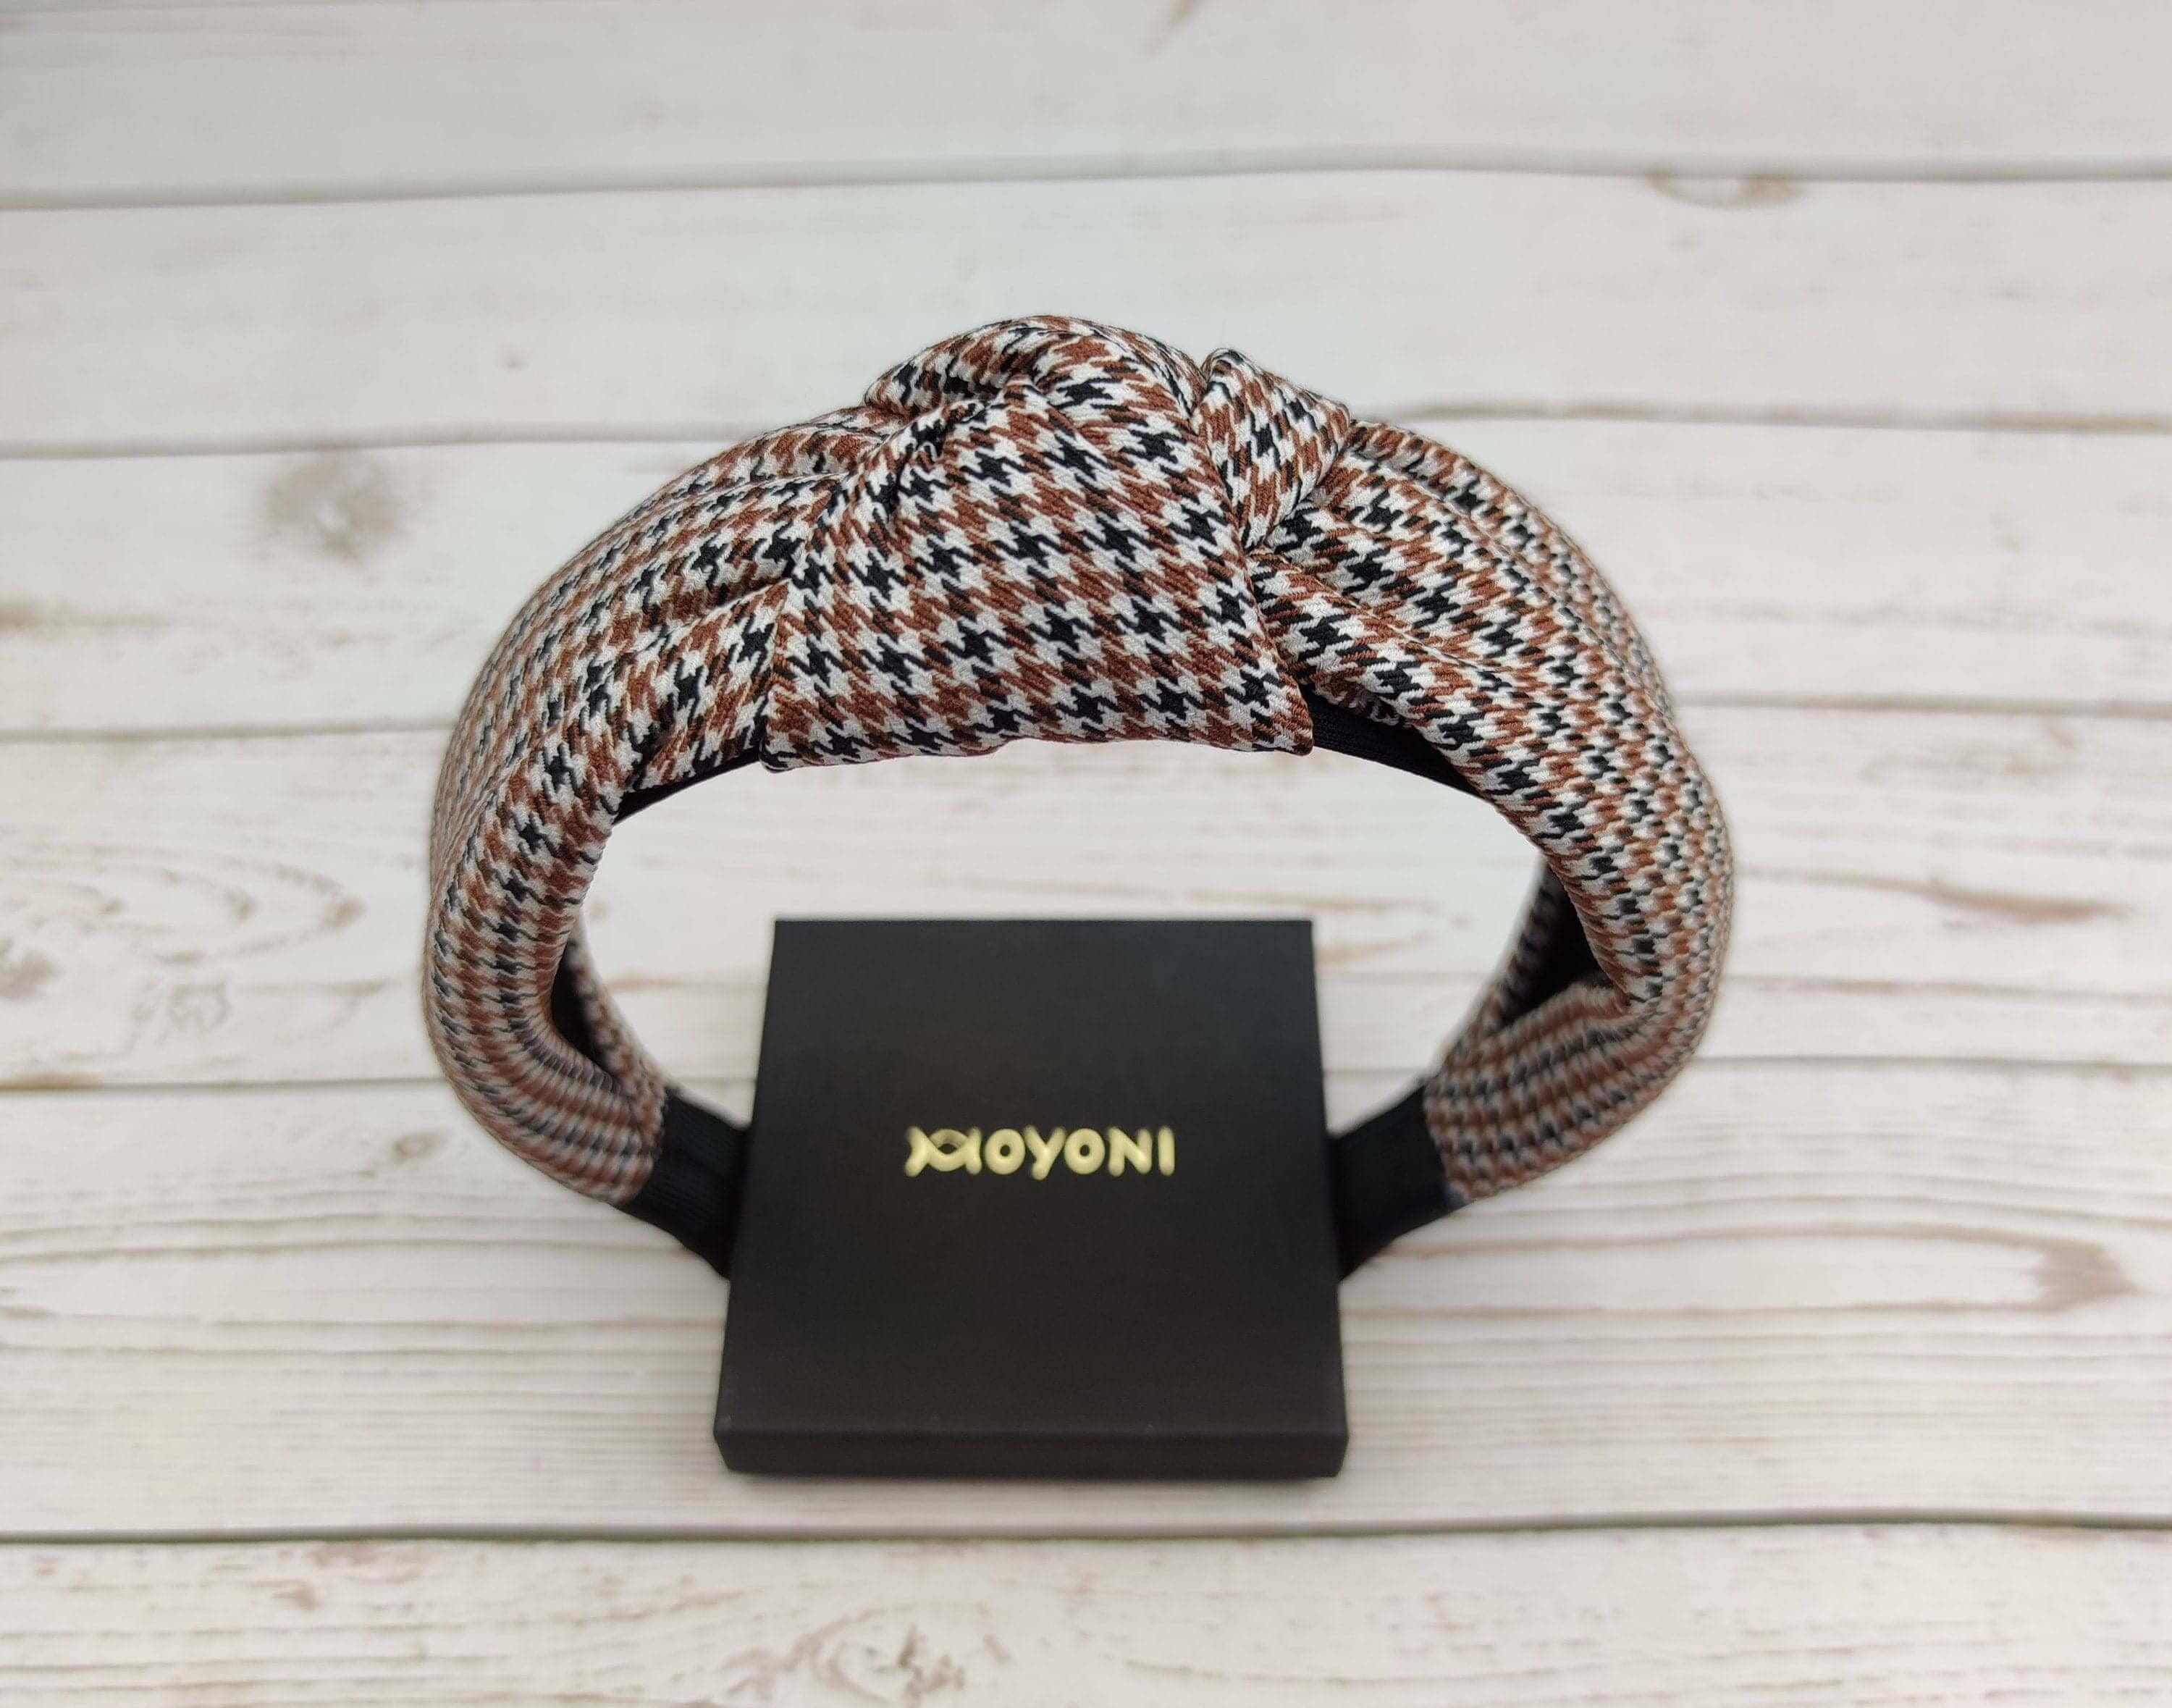 Elegant Chic White, Brown and Black Knotted Headband with Plaid Pattern for Women - Perfect for College! available at Moyoni Design